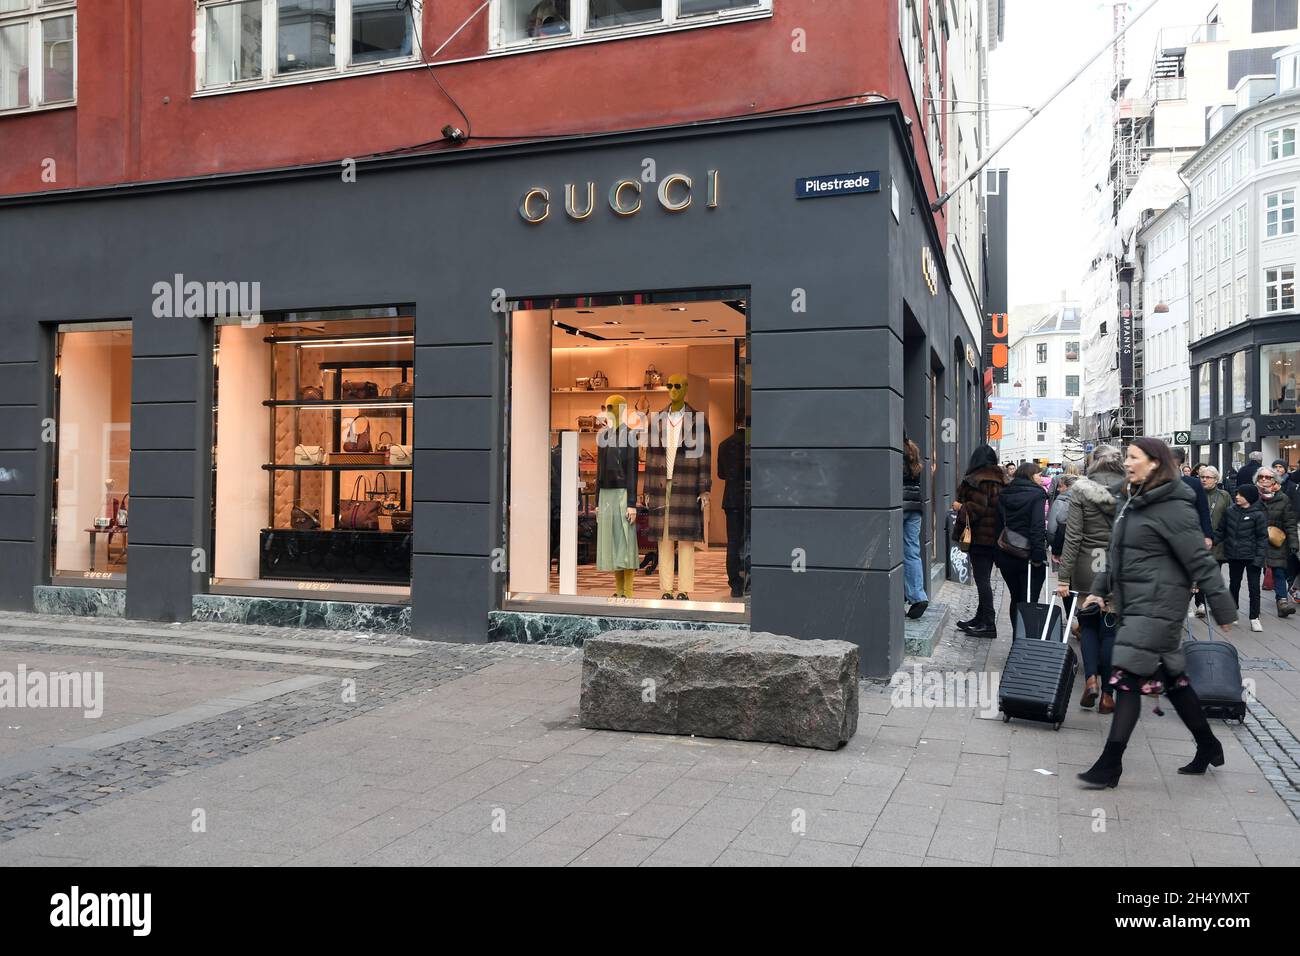 Gucci One 100 Years High Resolution Stock Photography and Alamy